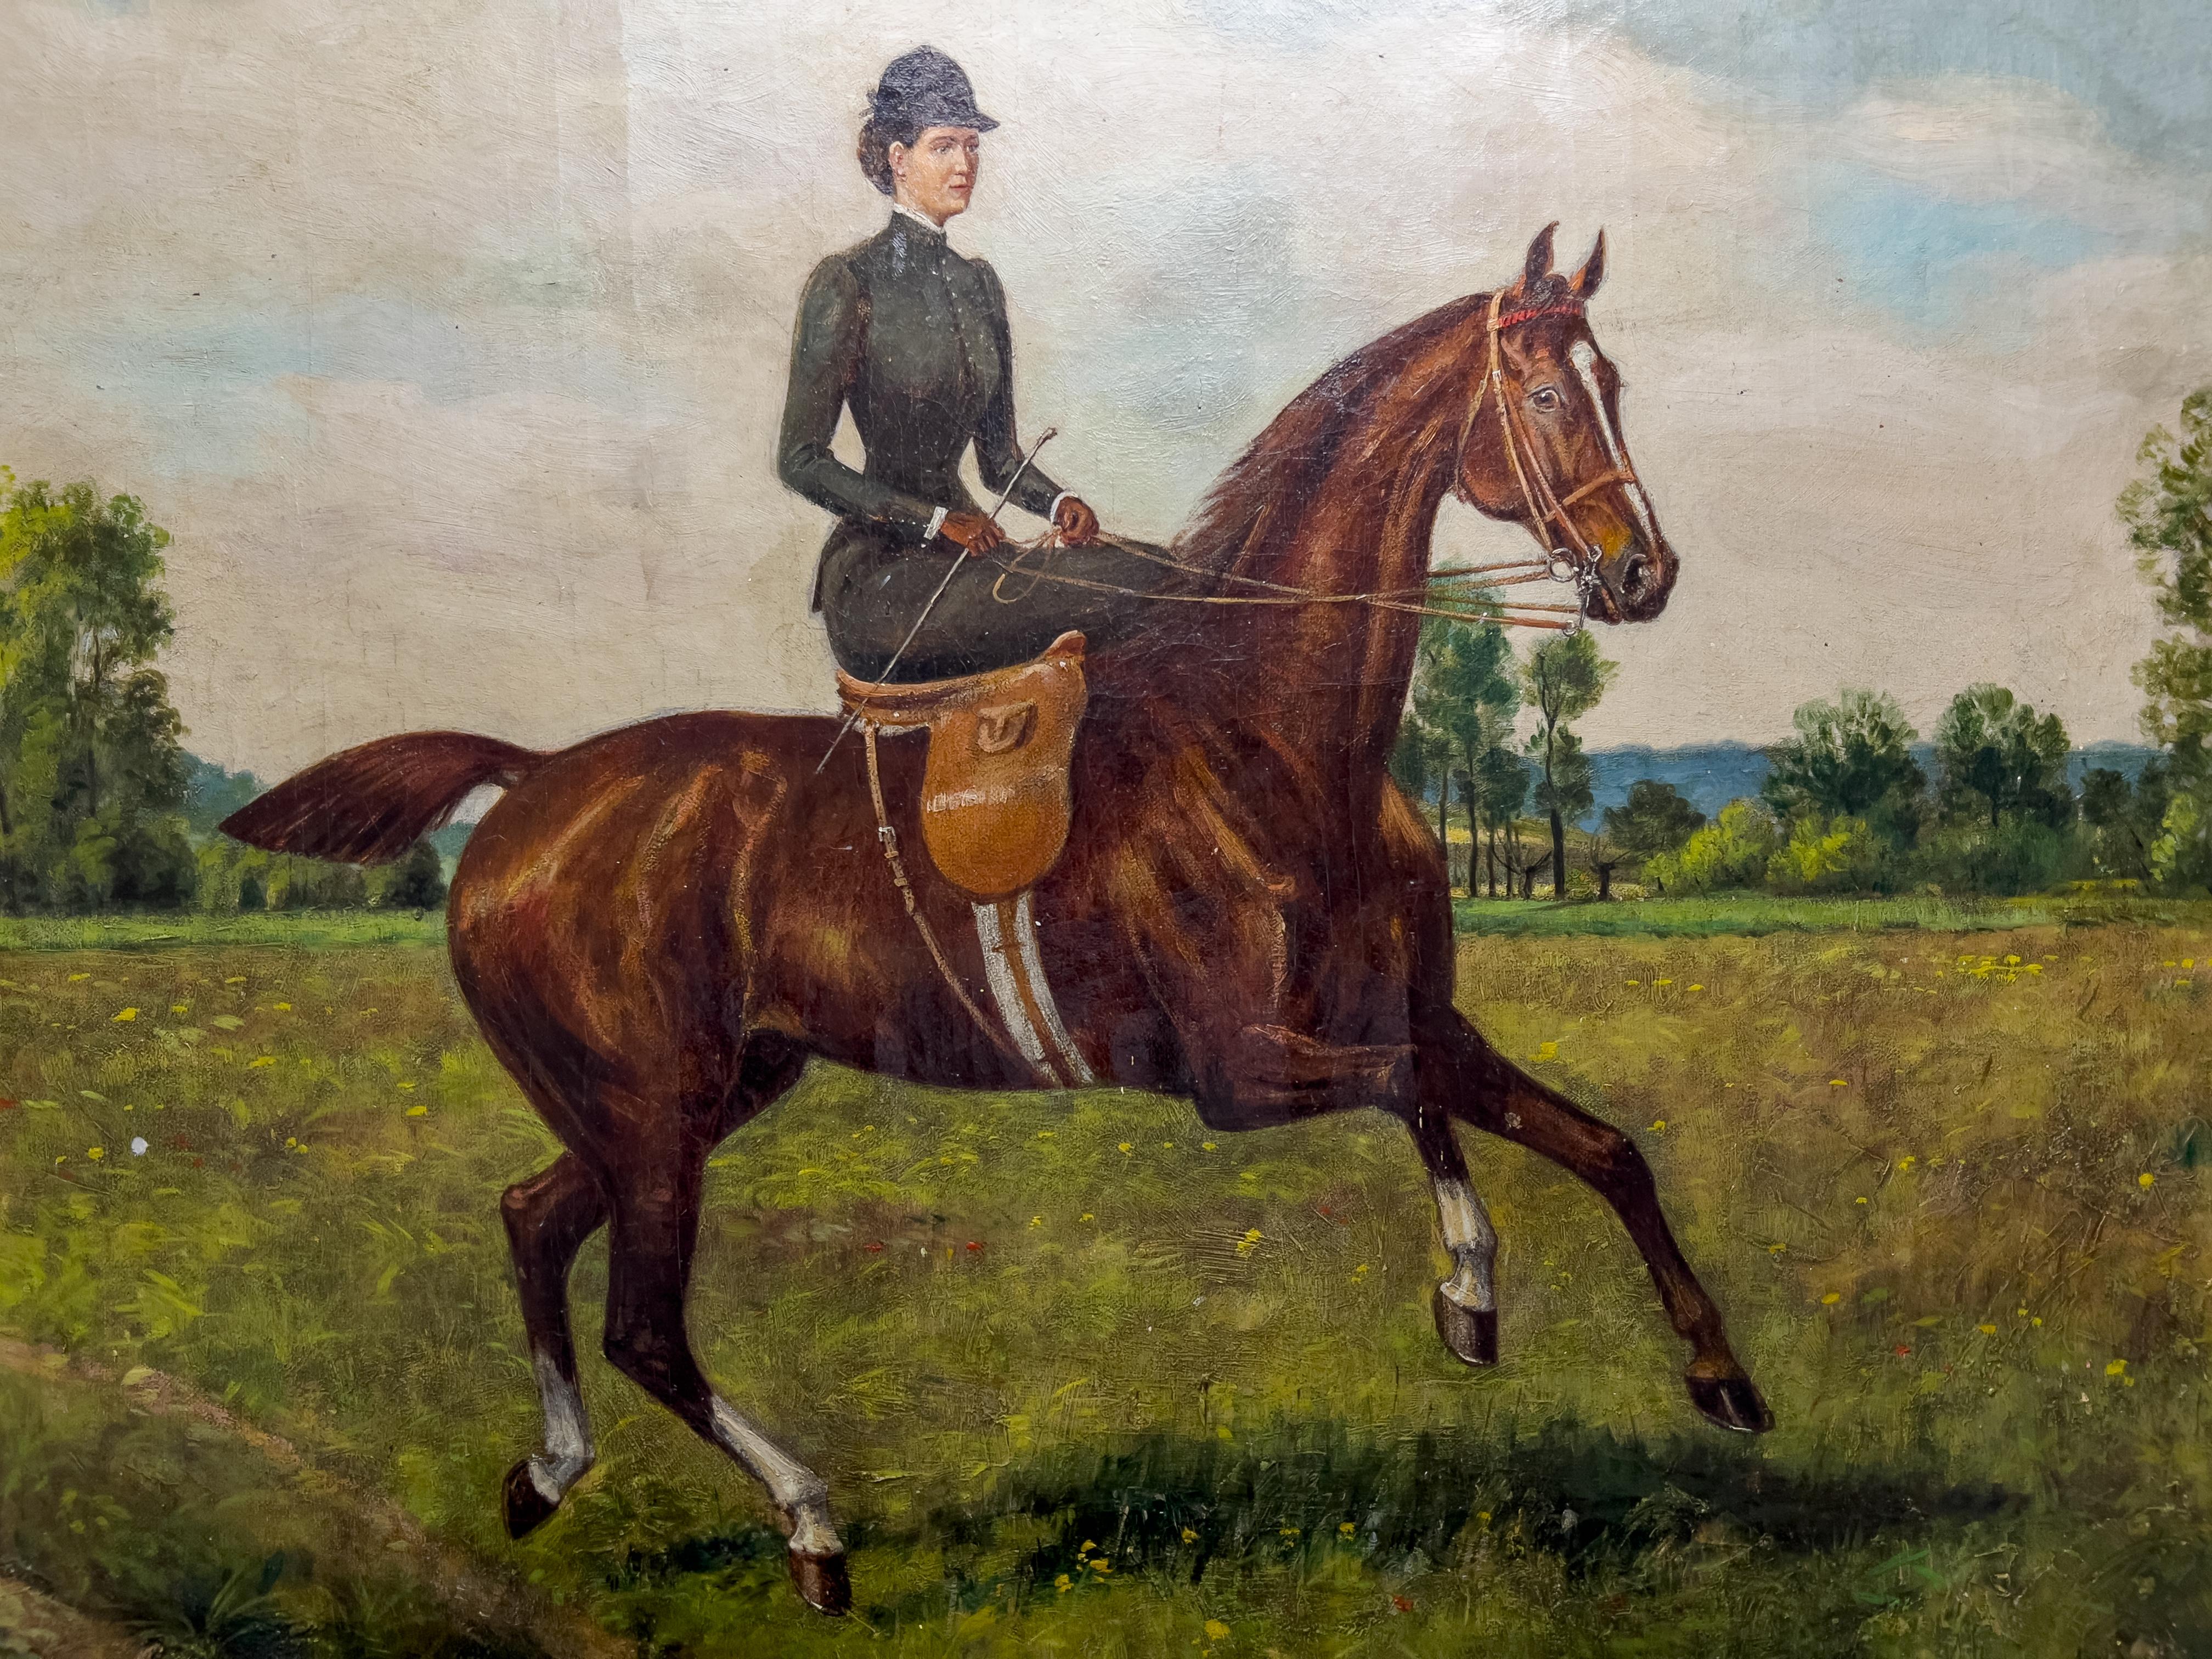 19th century English oil on canvas painting of a lady riding her horse side saddle on a green field, Excellent detail of the horse muscular definition. Wonderfully detail and charming scene on a subject that was hugely popular during the period